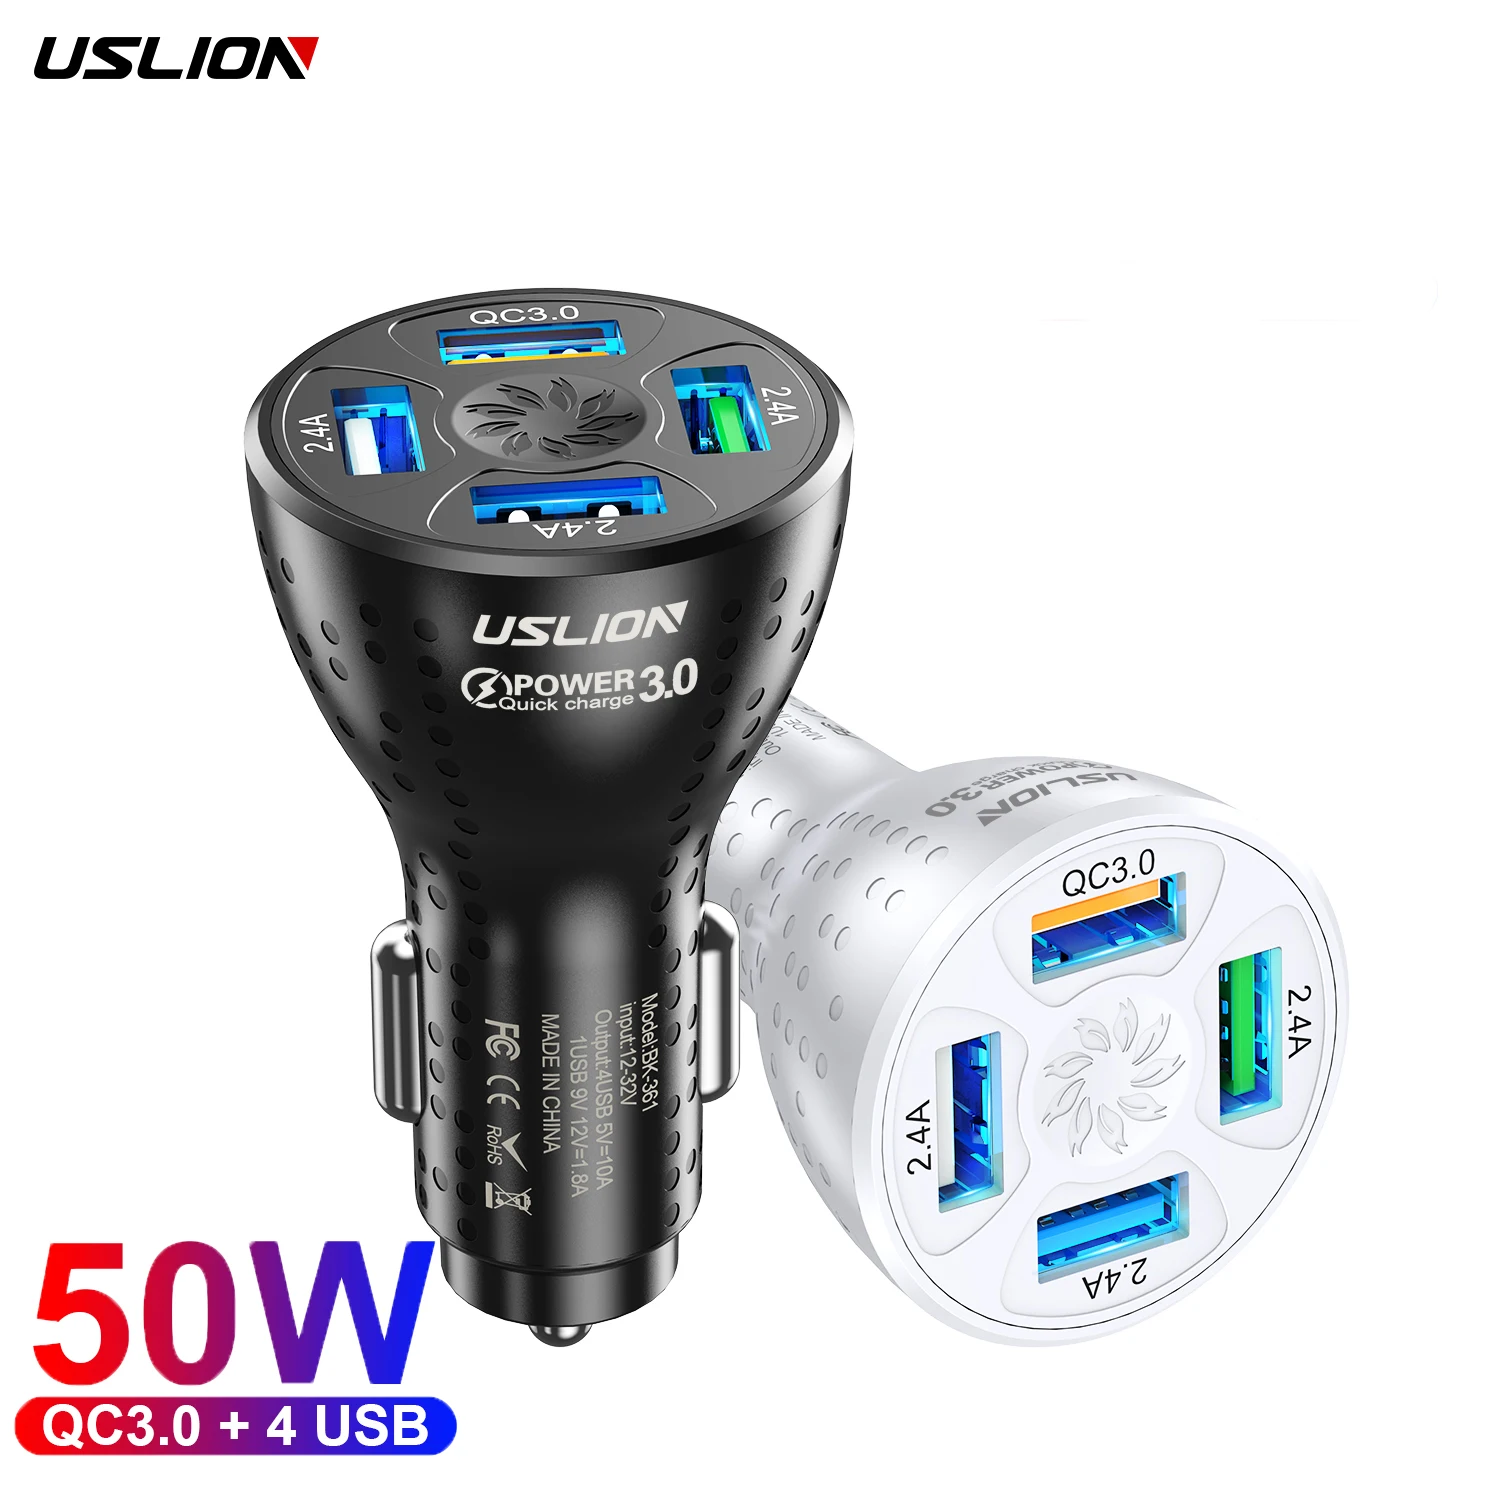 

USLION Quick Delivery Amazon Best Seller 2021 New Car Mobile Accessories 5V 10A 4 USB QC3.0 Fast Car Charger Mobile Phone, Black,white